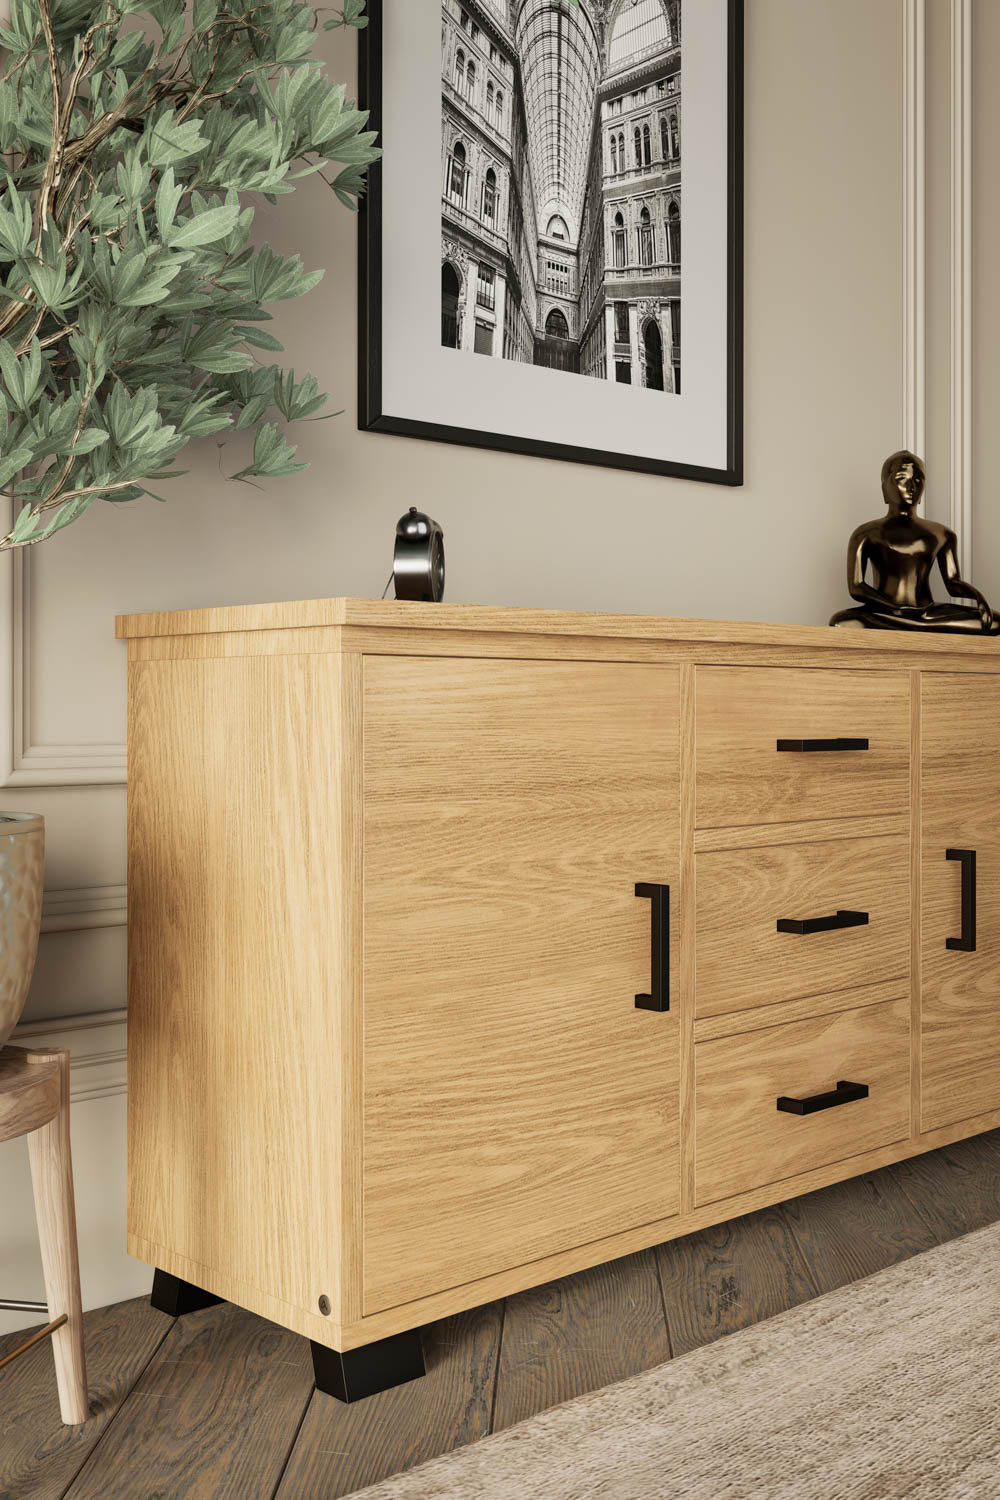 bespoke-sideboard-abacus-tables-aurora-solo-details-1